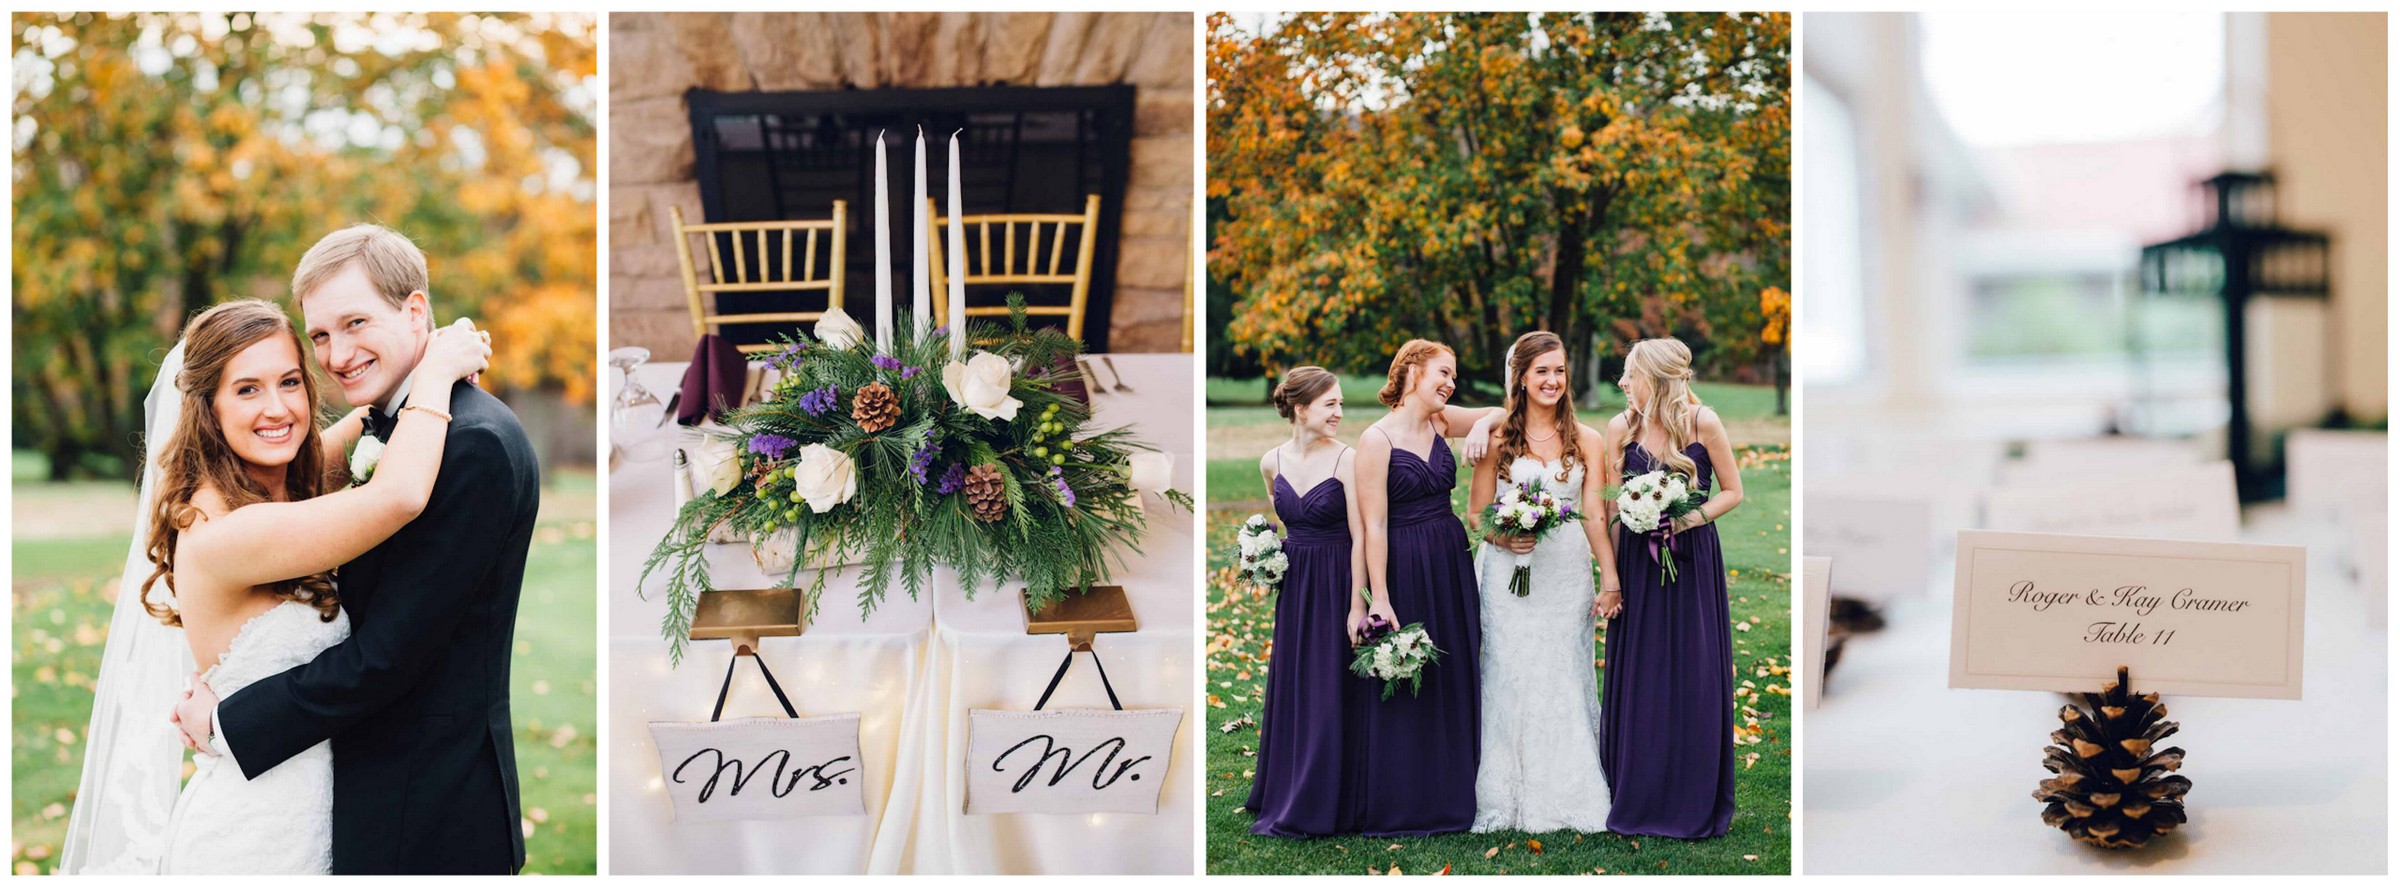 Wonderfully Woodsy Winter Wedding in Purple and Green - Ctg Photography